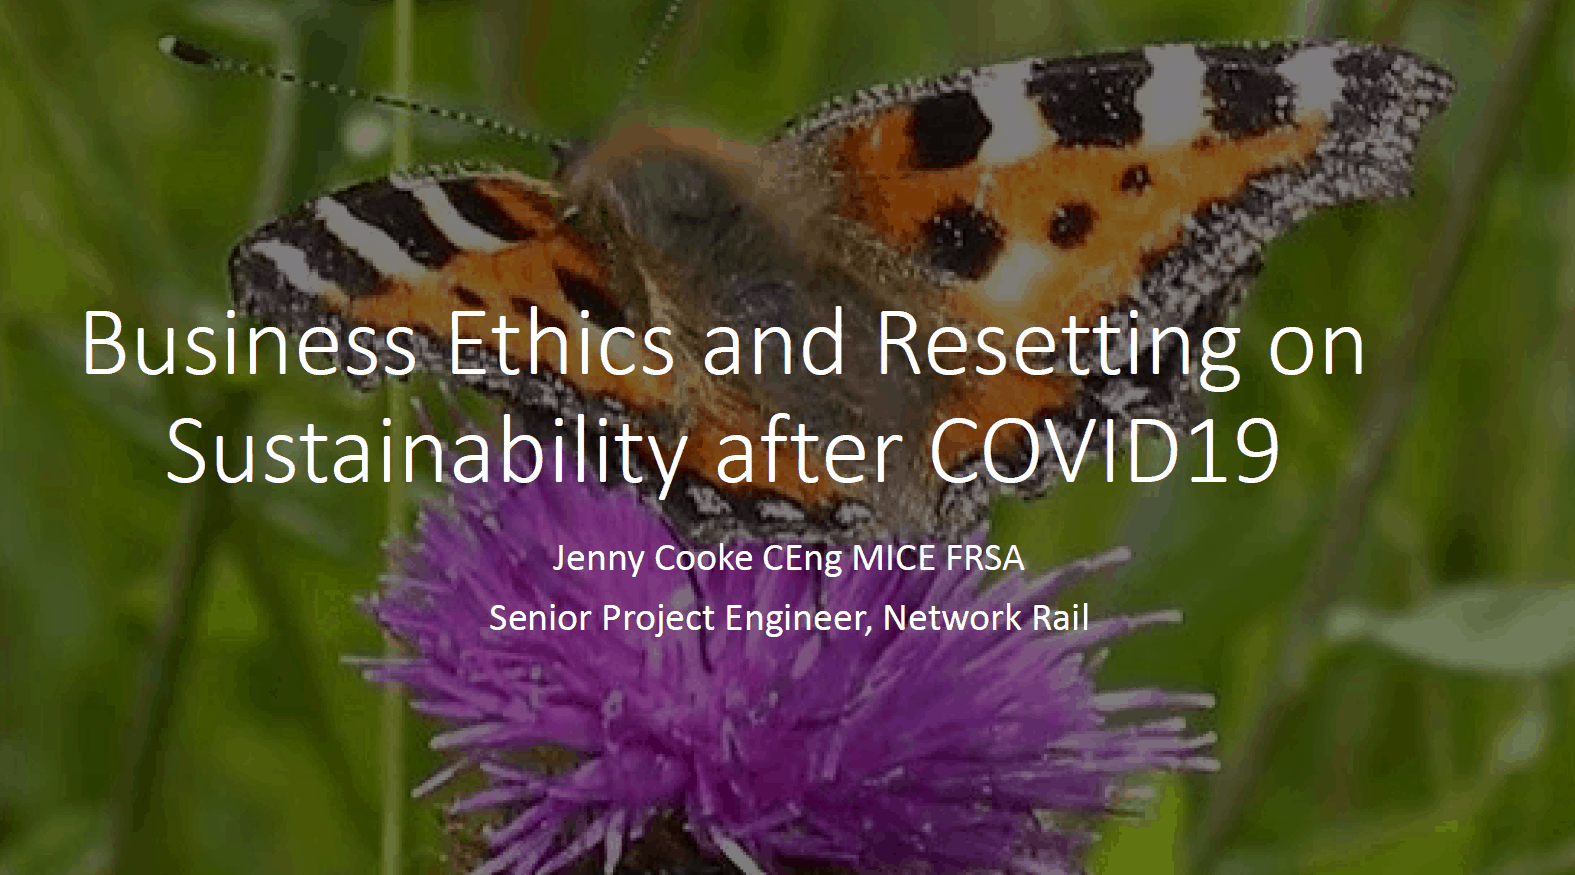 Business Ethics and Resetting on Sustainability Event – Video & Resources